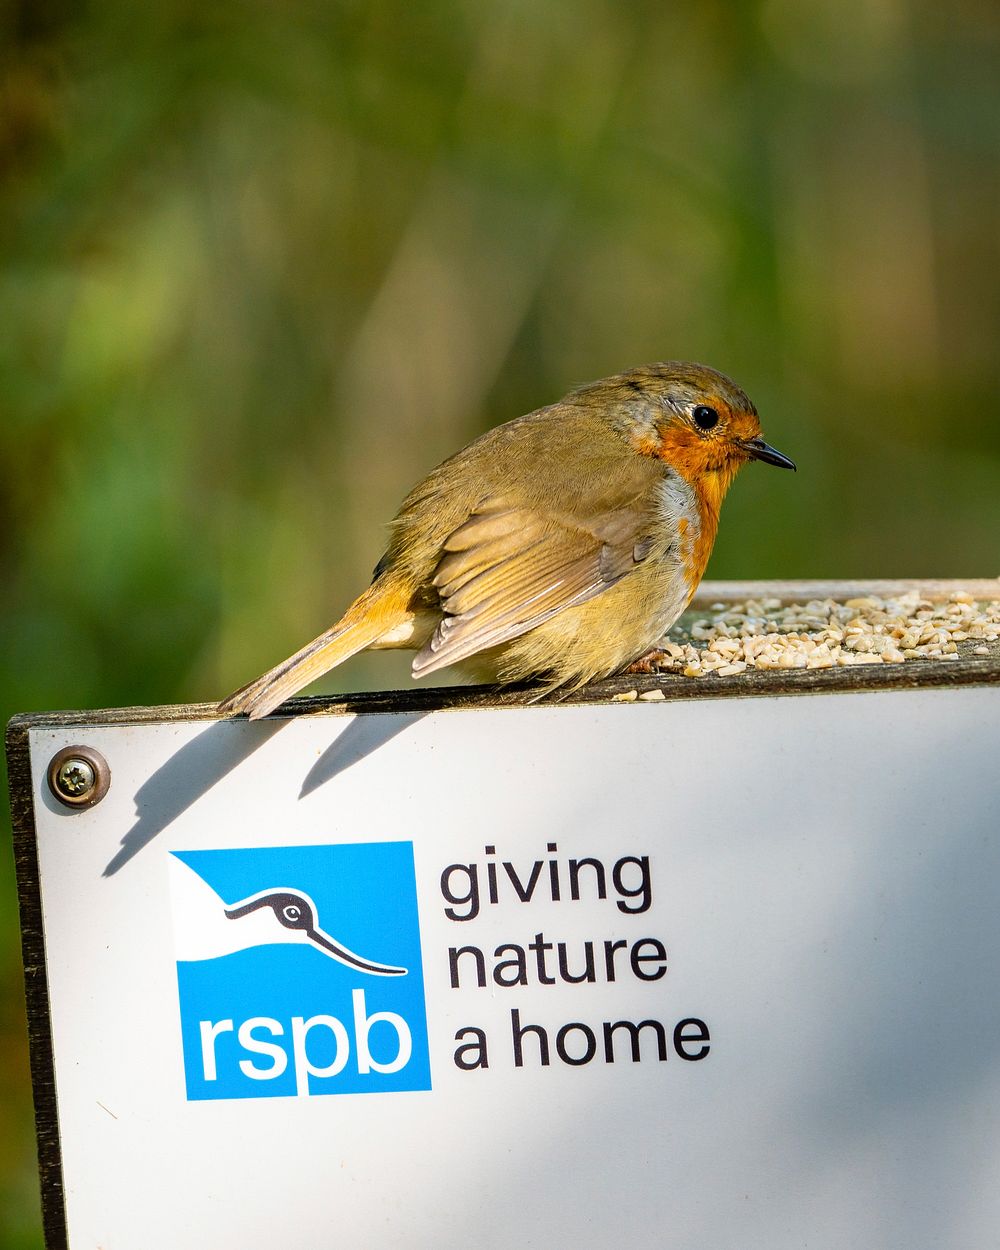 Cute bird. Animal conservation charity at Leighton Moss, Silverdale. Original public domain image from Flickr